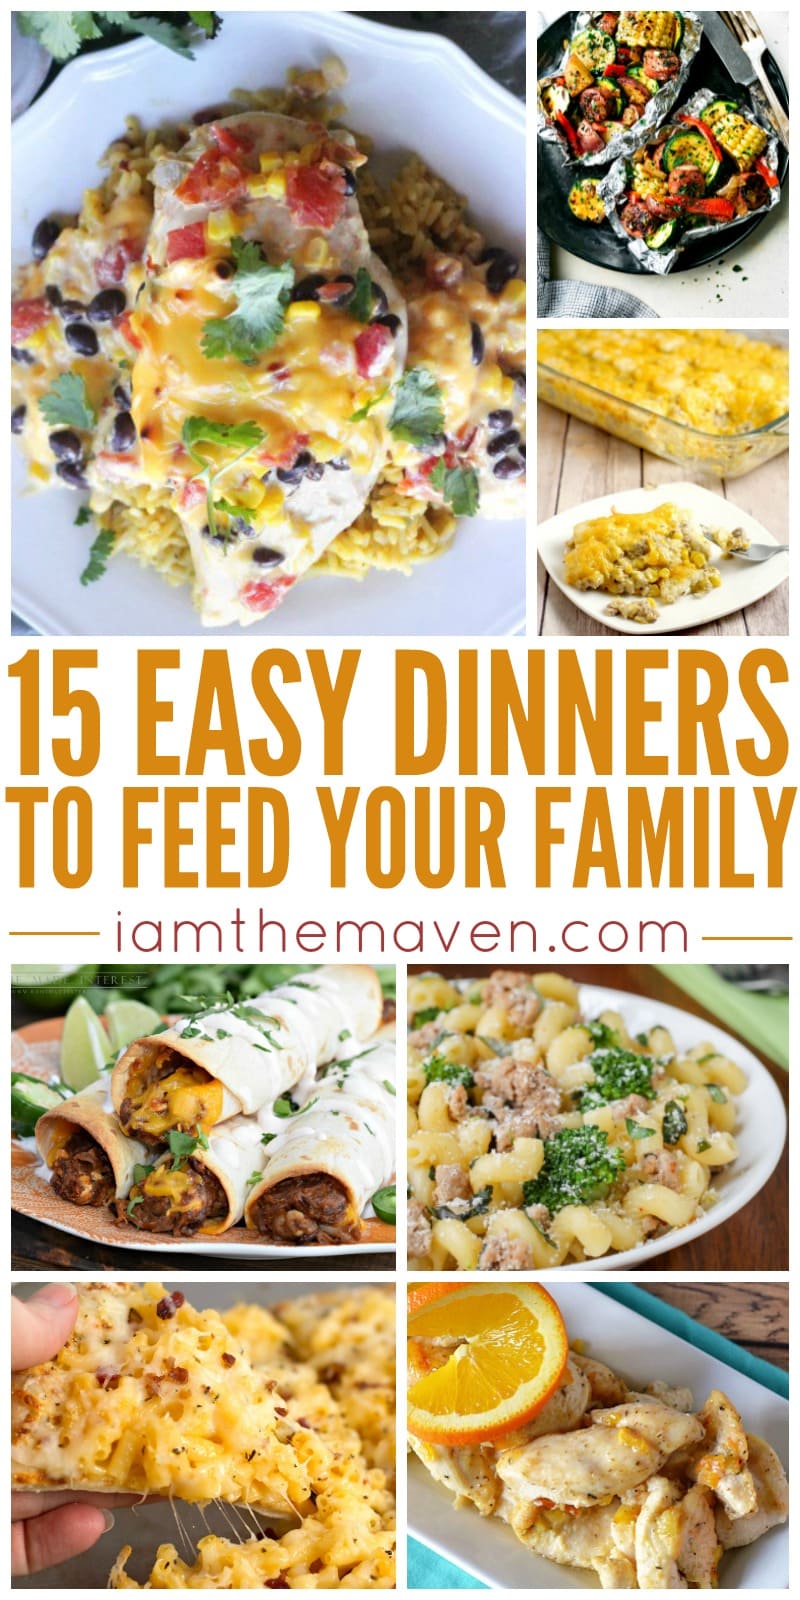 Try One of These Easy Dinner Ideas Tonight! - I am the Maven®